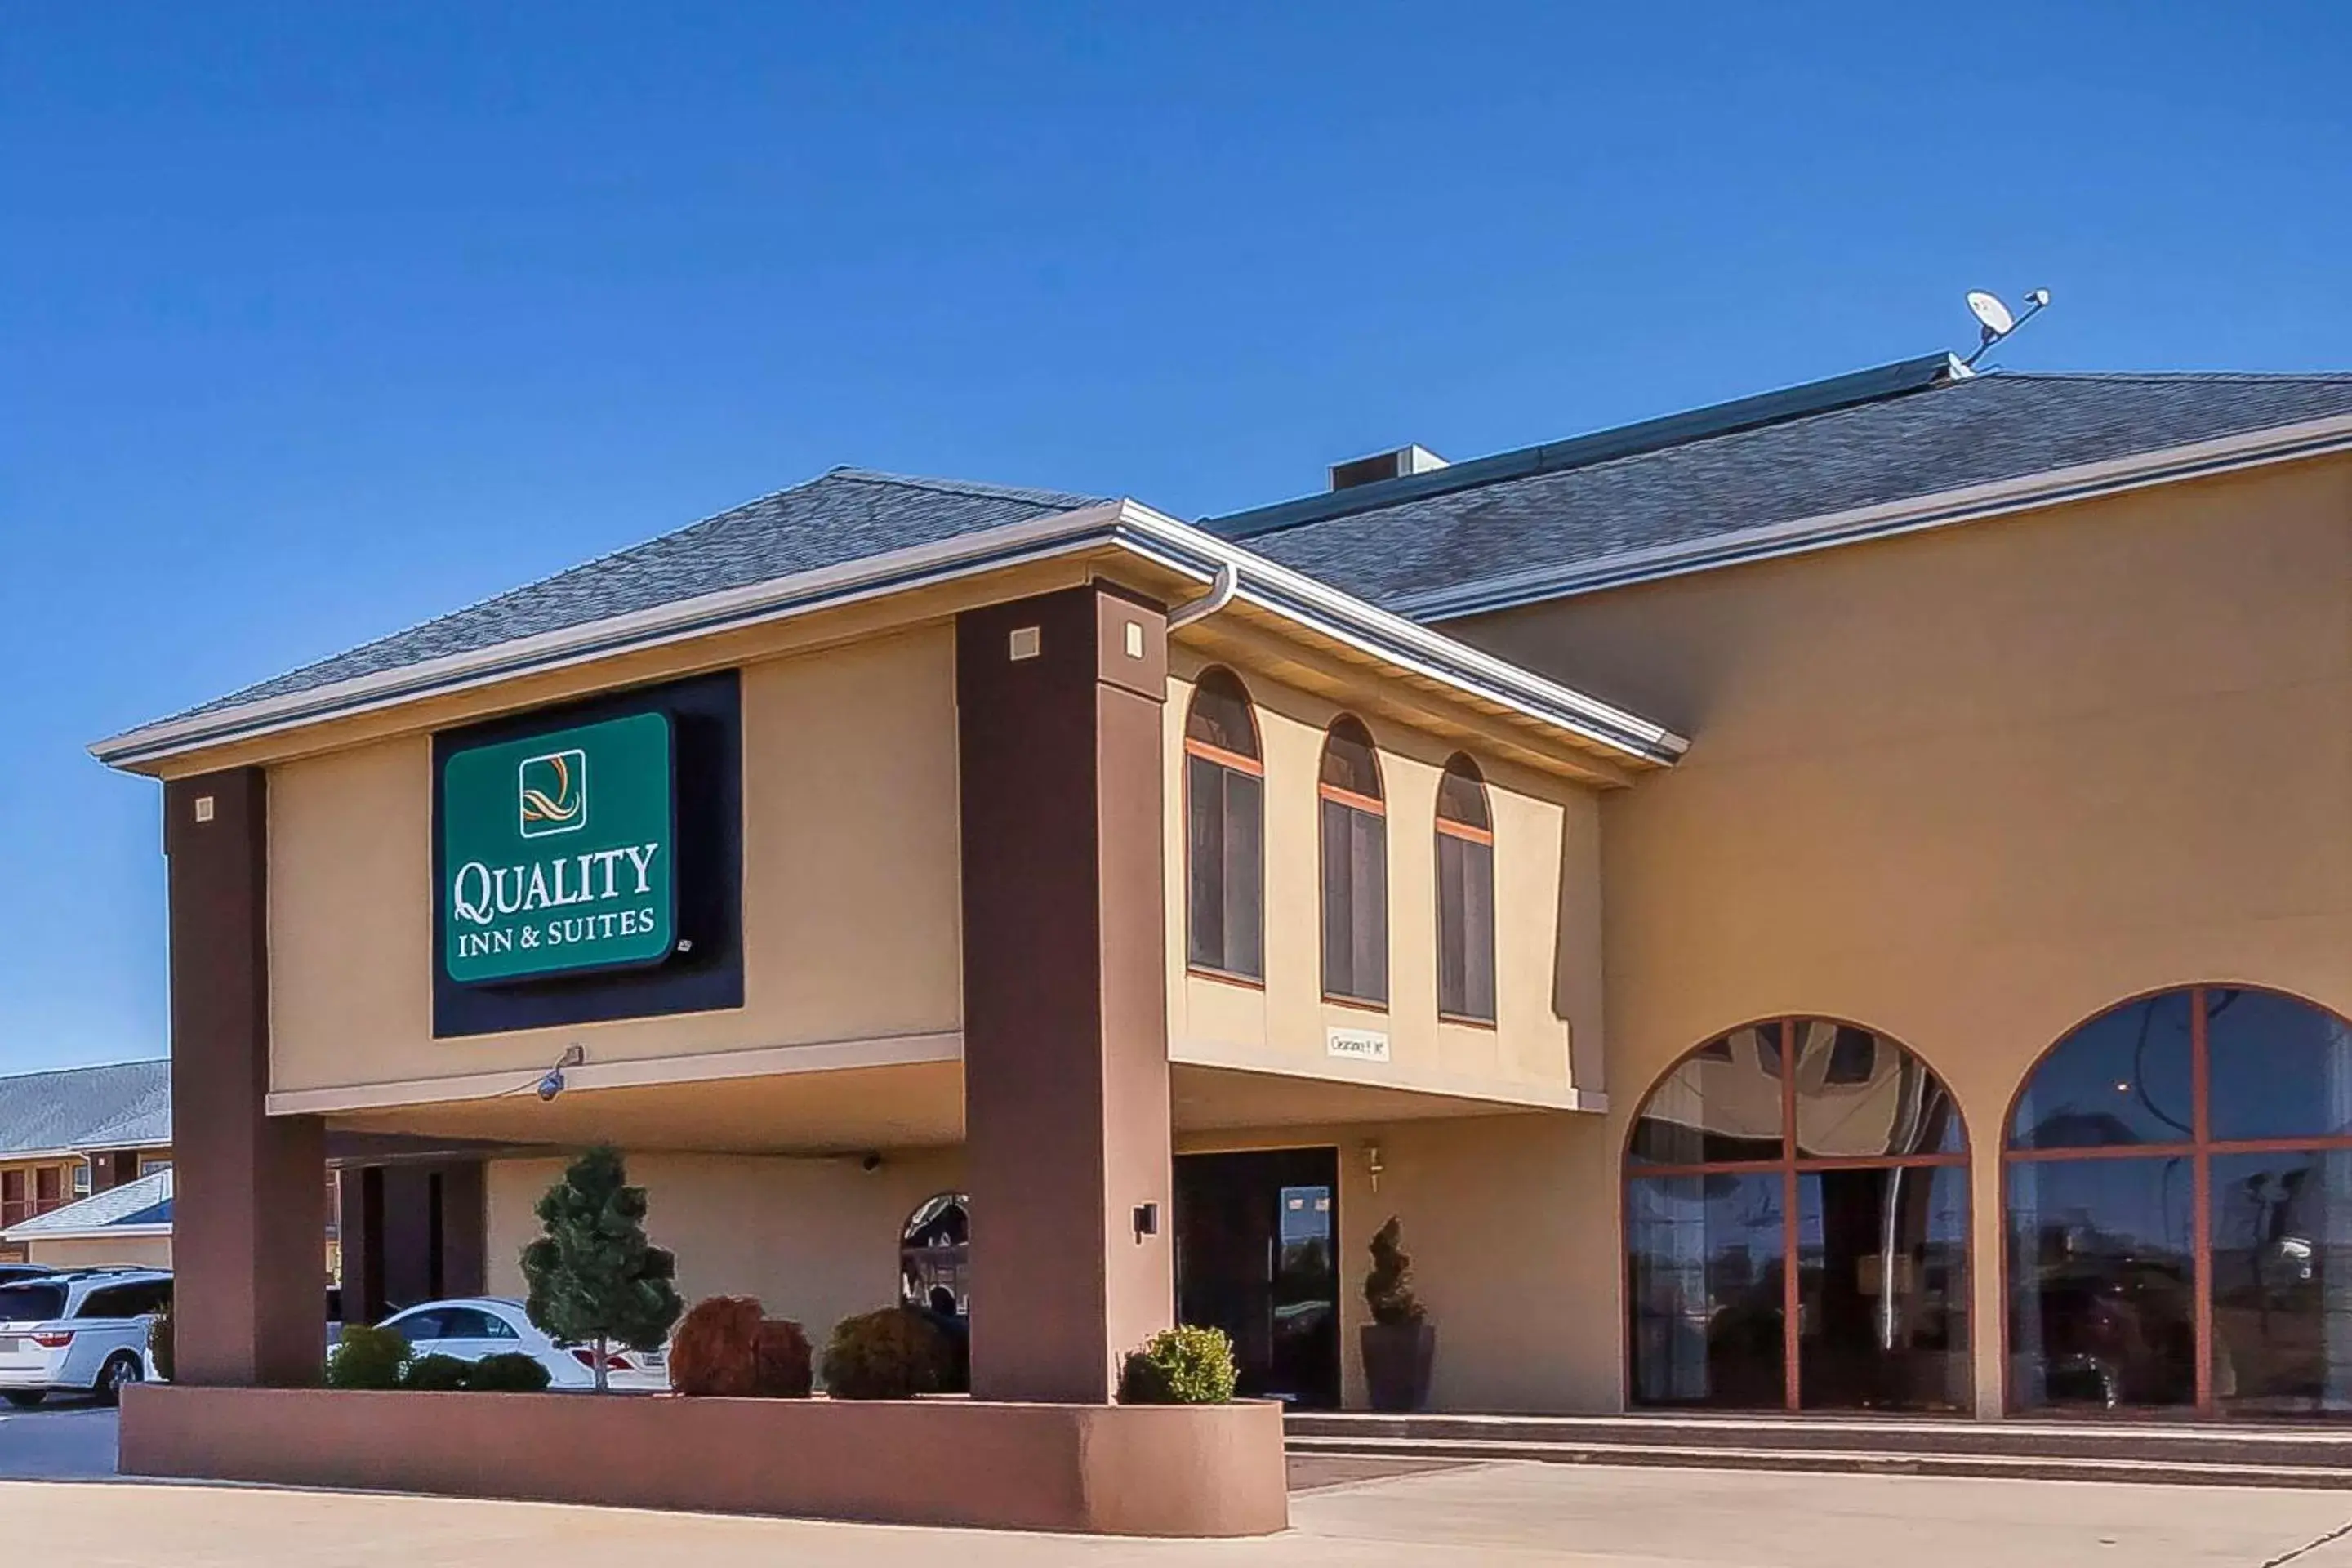 Property Building in Quality Inn & Suites Owasso US-169